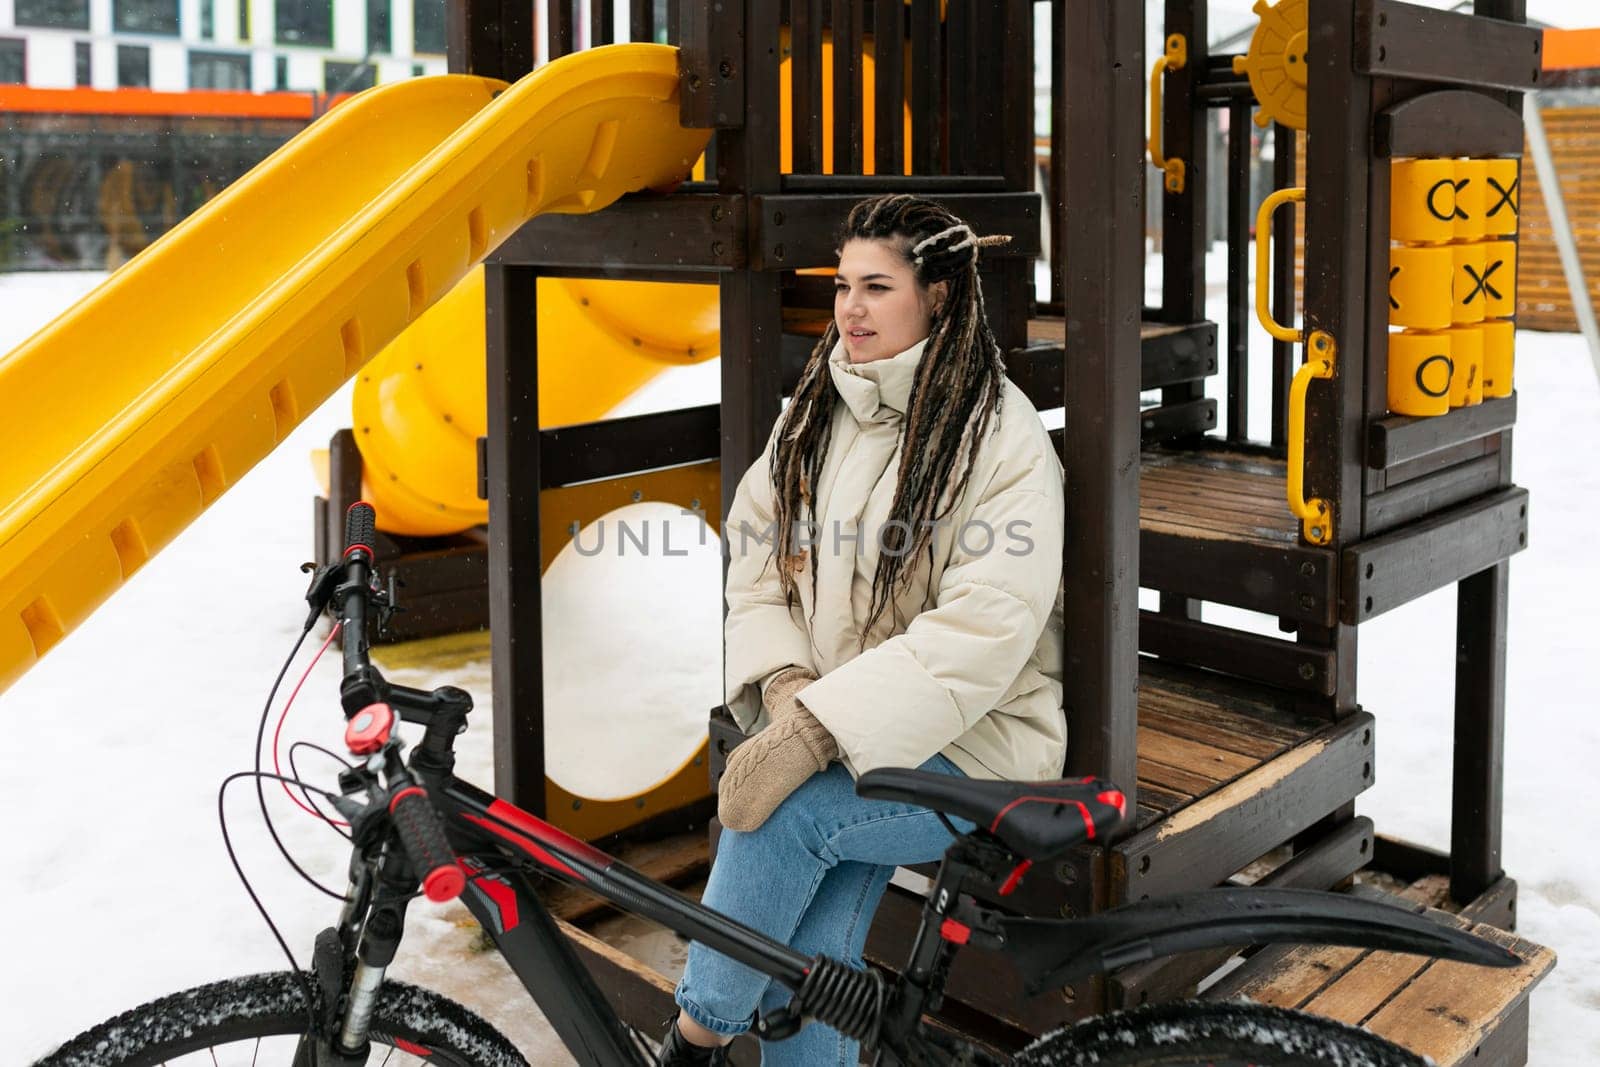 A woman is seated on a bench next to a parked bicycle in an urban setting. She appears to be taking a break or enjoying a moment of rest after cycling. The scene captures a simple, everyday moment of relaxation.